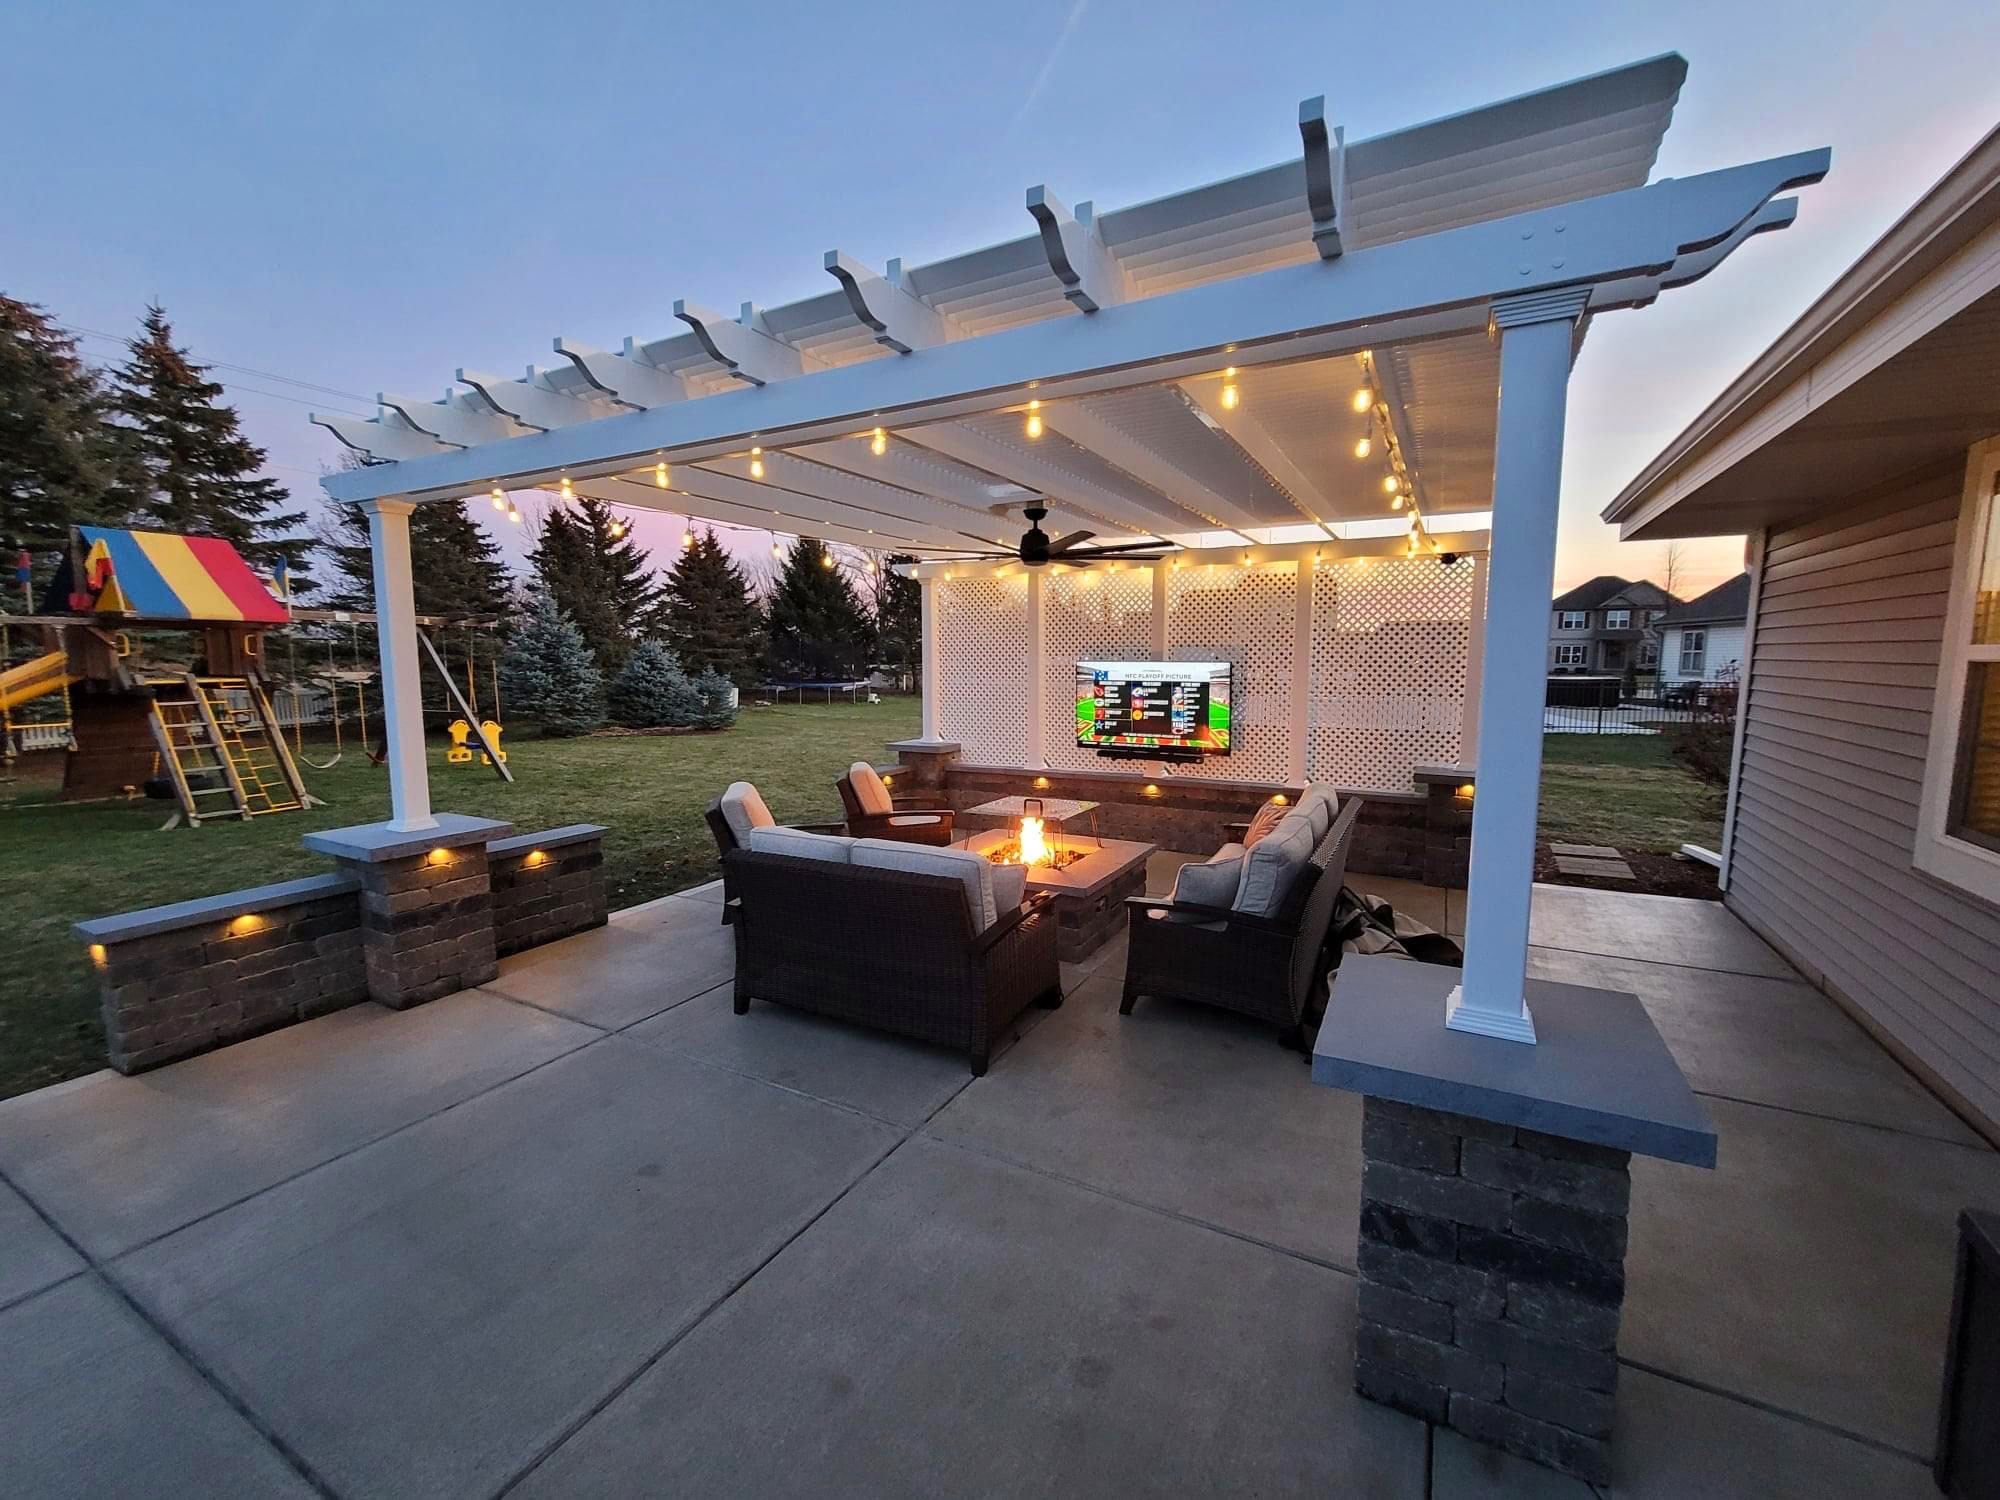 Outdoor living patio with tv, firepit and furniture under a large white pergola on stone columns